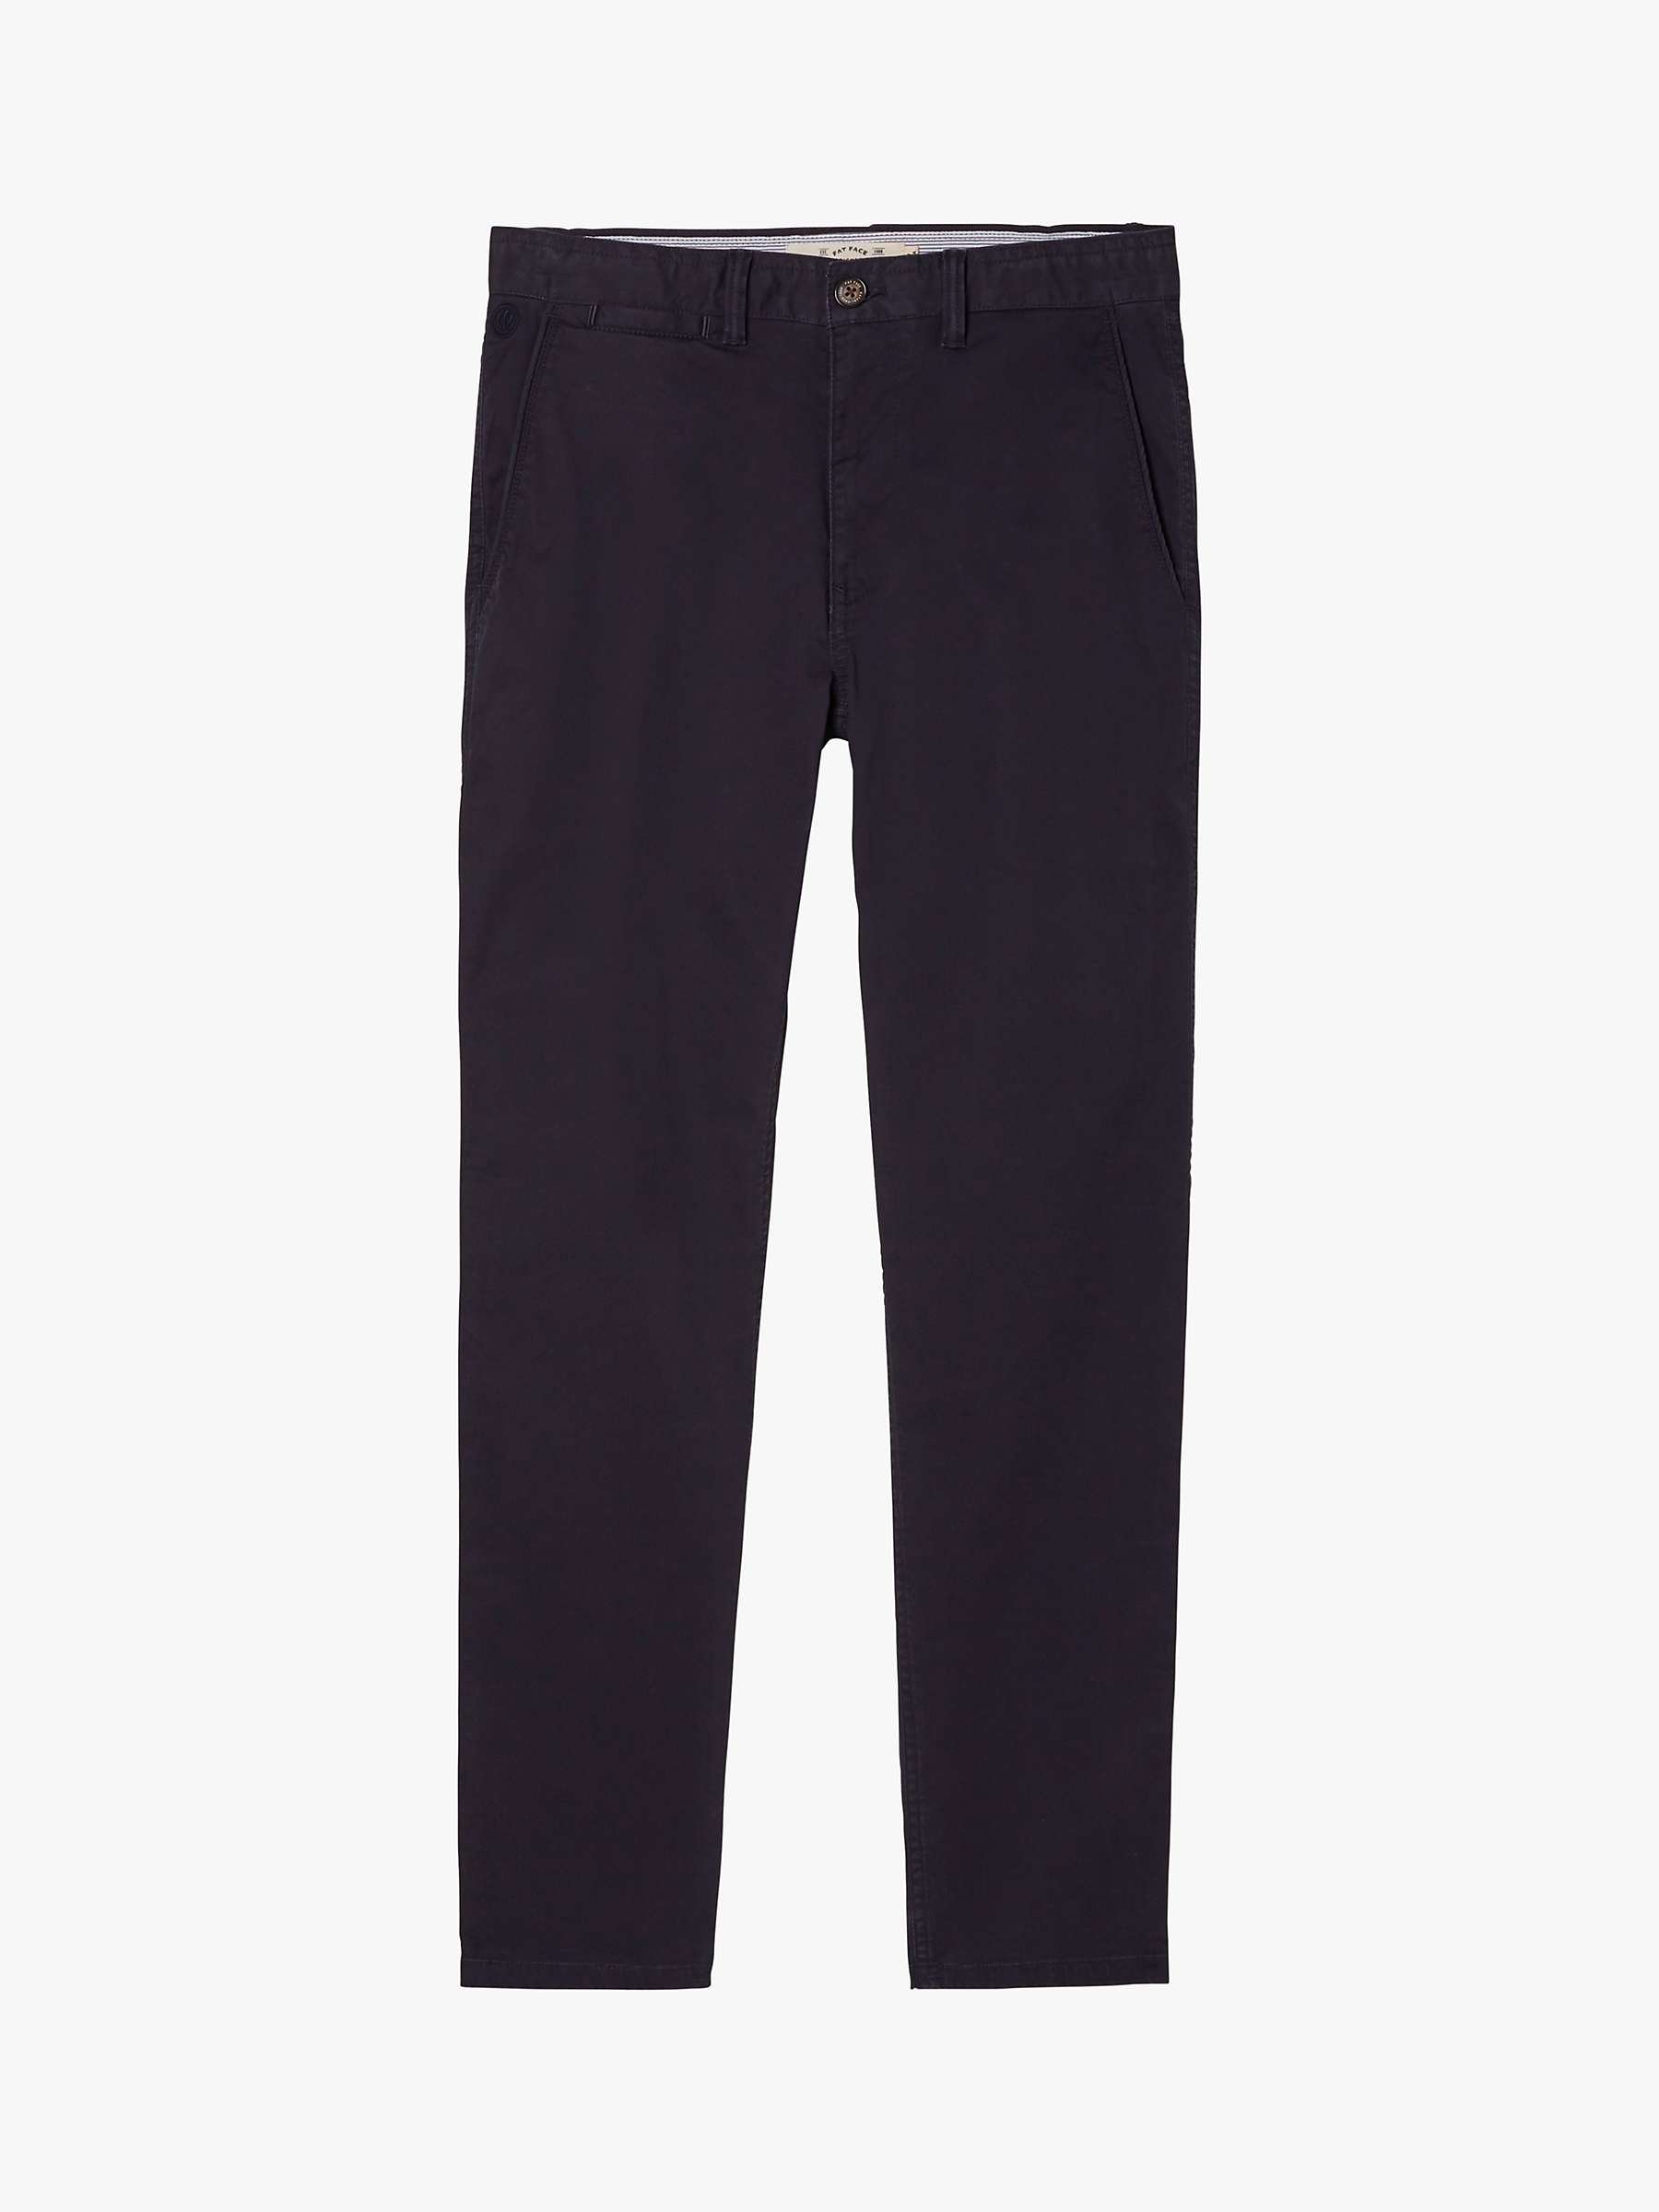 Buy FatFace Slim Chinos, Navy Online at johnlewis.com